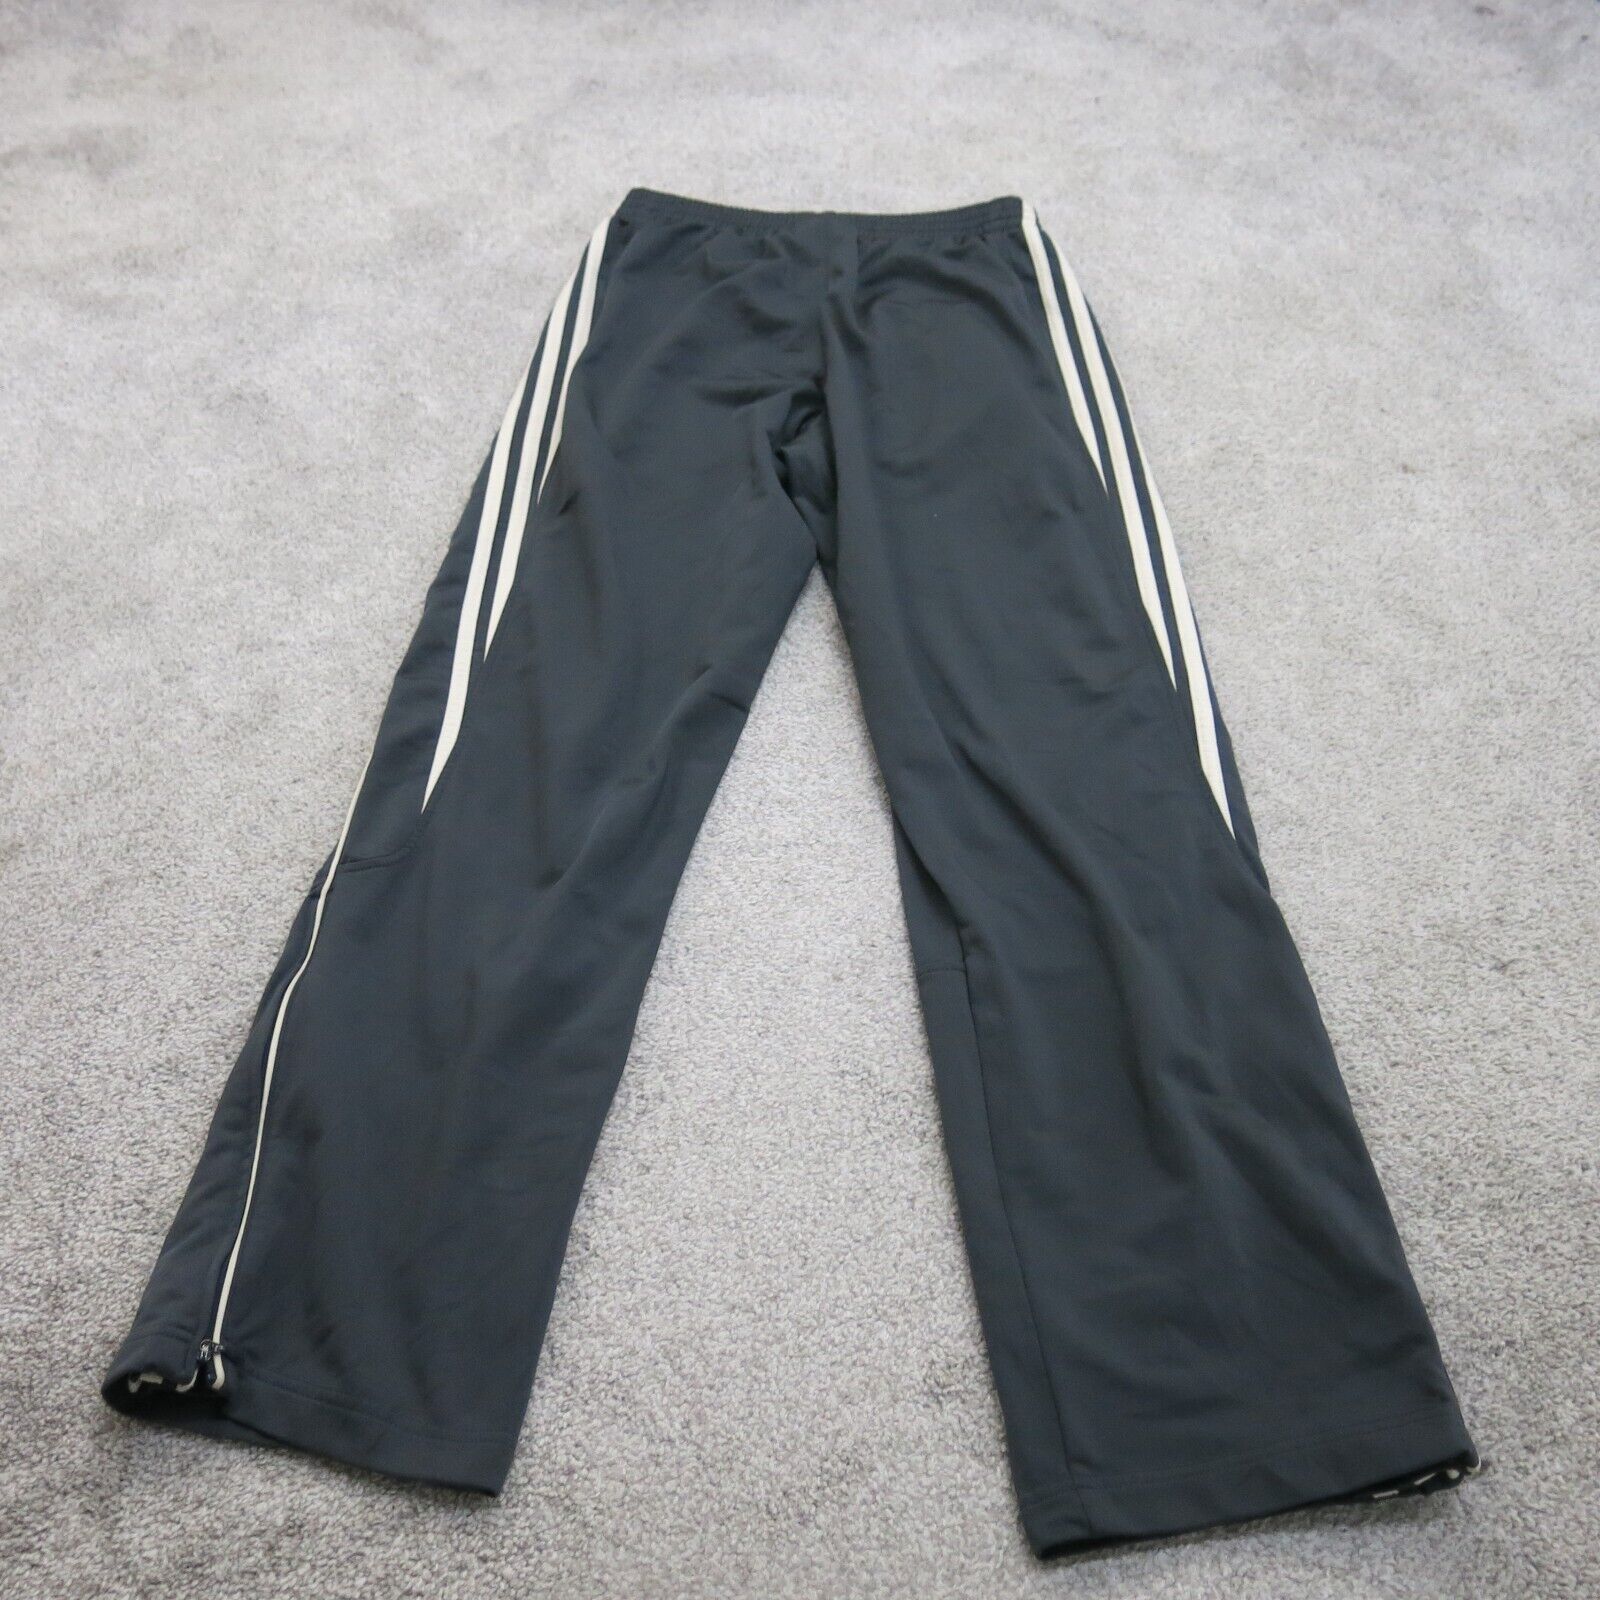 Adidas Pants Women Small Black Casual Outdoor Activewear Track